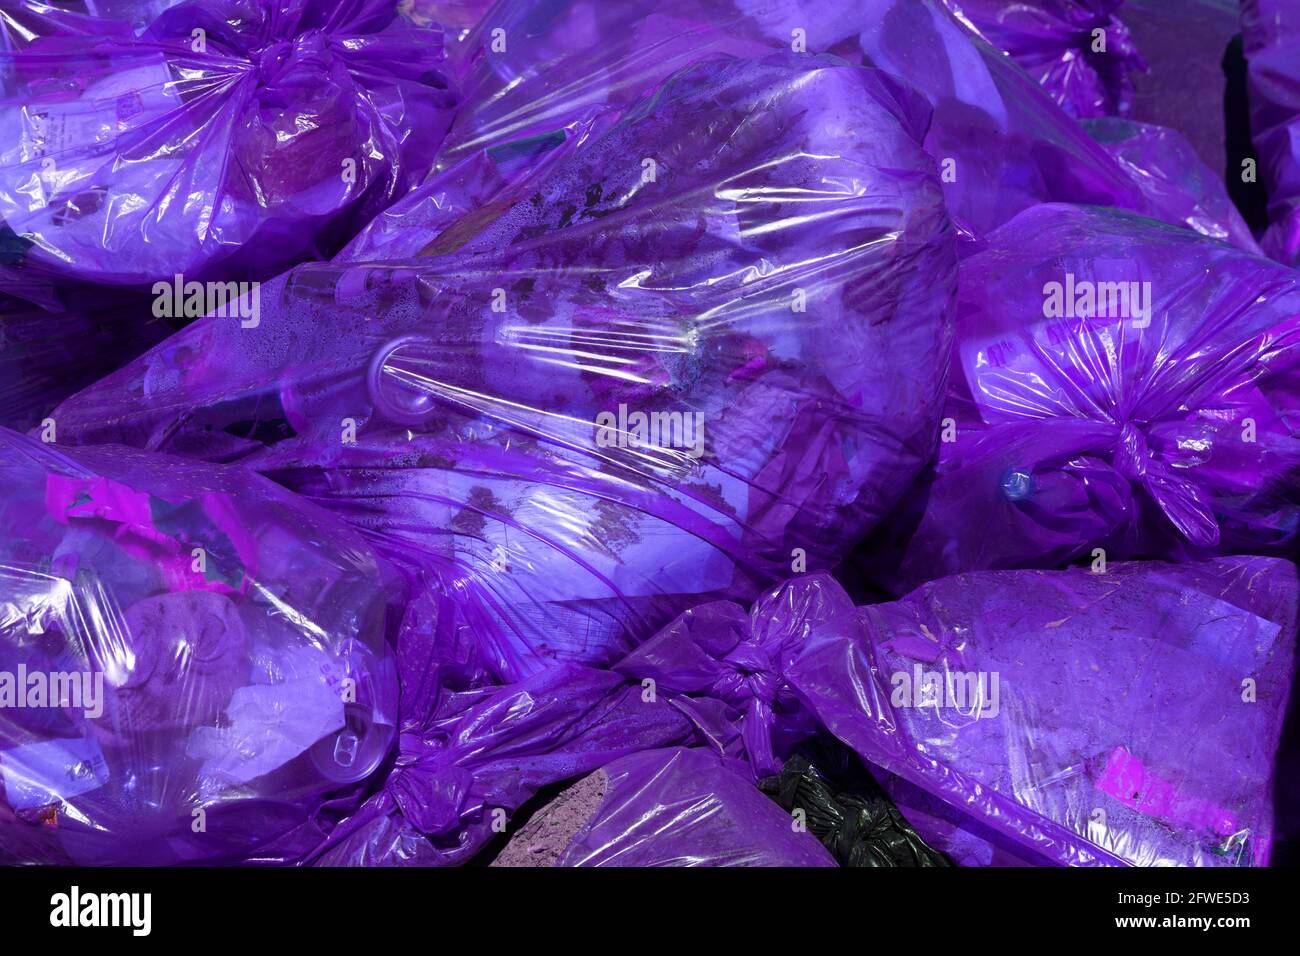 https://c8.alamy.com/comp/2FWE5D3/full-frame-background-of-purple-plastic-trash-bags-with-generic-domestic-waste-2FWE5D3.jpg